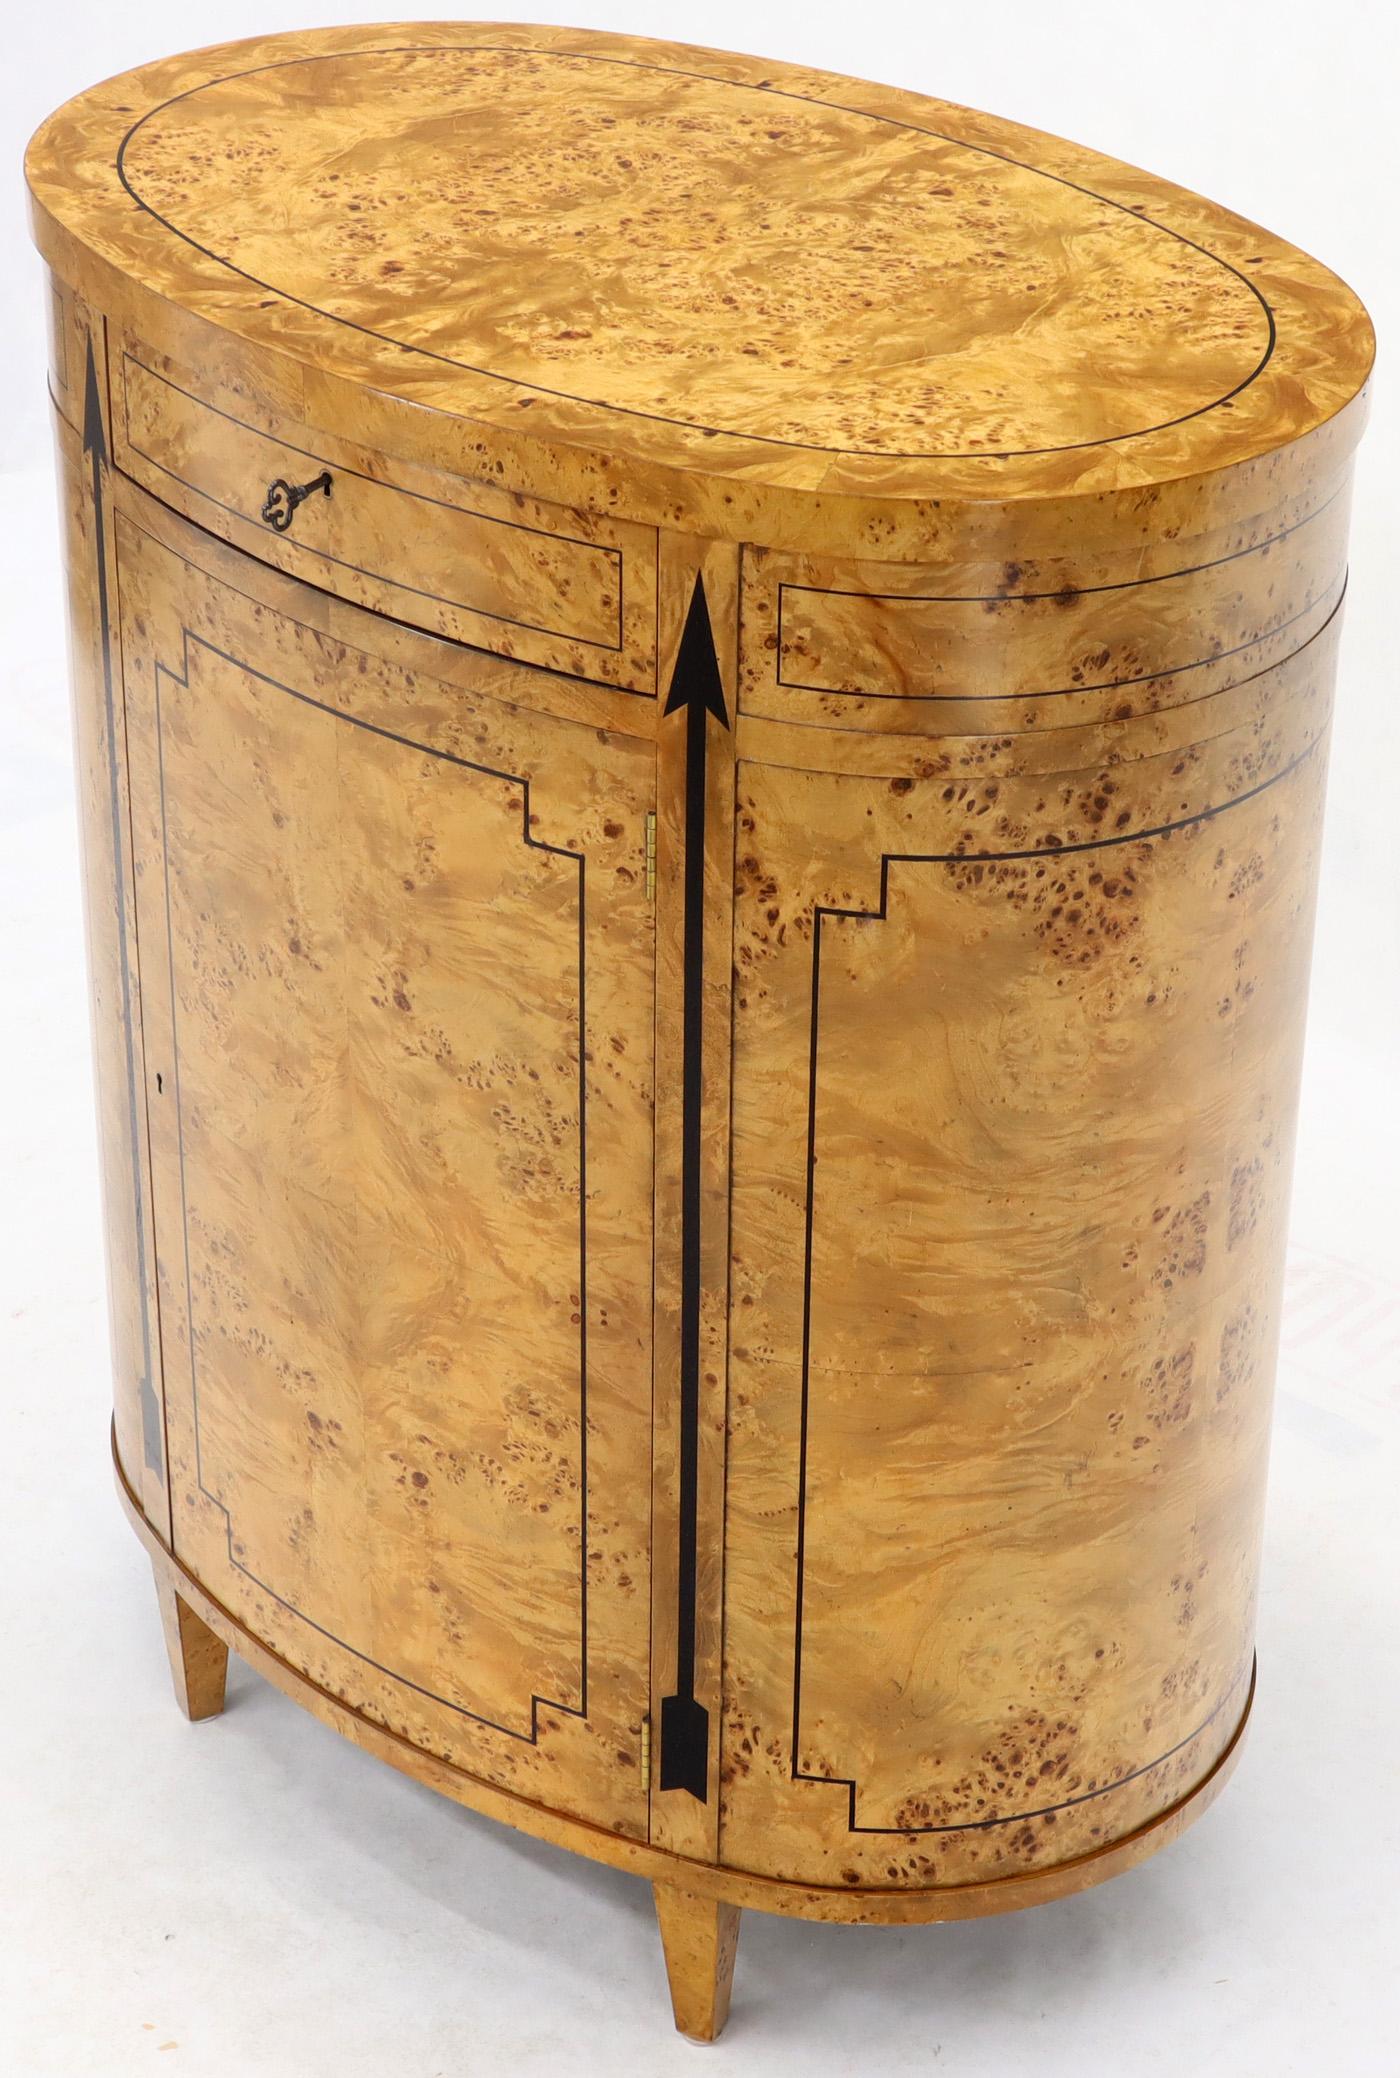 20th Century Tall Oval Burl Wood One Drawer Neoclassical Centre Cabinet by Baker Furniture